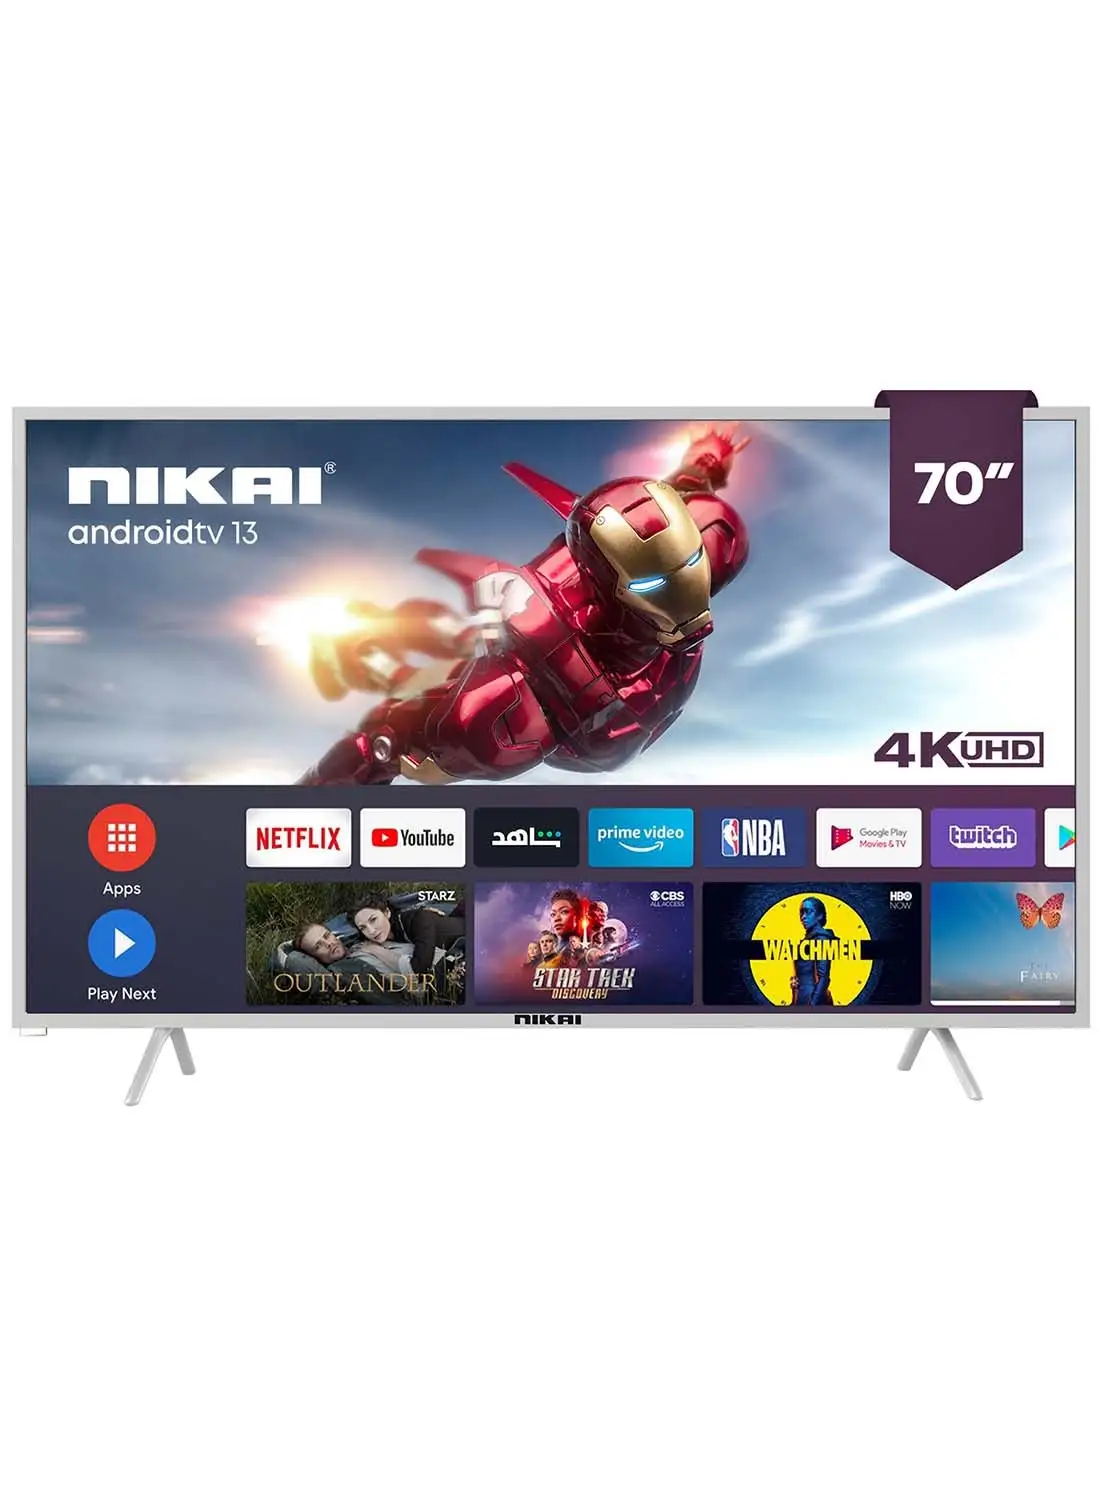 NIKAI 70 Inch Smart LED TV, Frameless Design, Built-In Wi-Fi, Smart Apps Shahid, YouTube, Netflix, Amazon, HDMI And USB Connectivity, Quad-Core, 1.5 GB RAM, 8 GB Memory, Auto Power Off Android 13.0 UHD70SLED Silver/Black